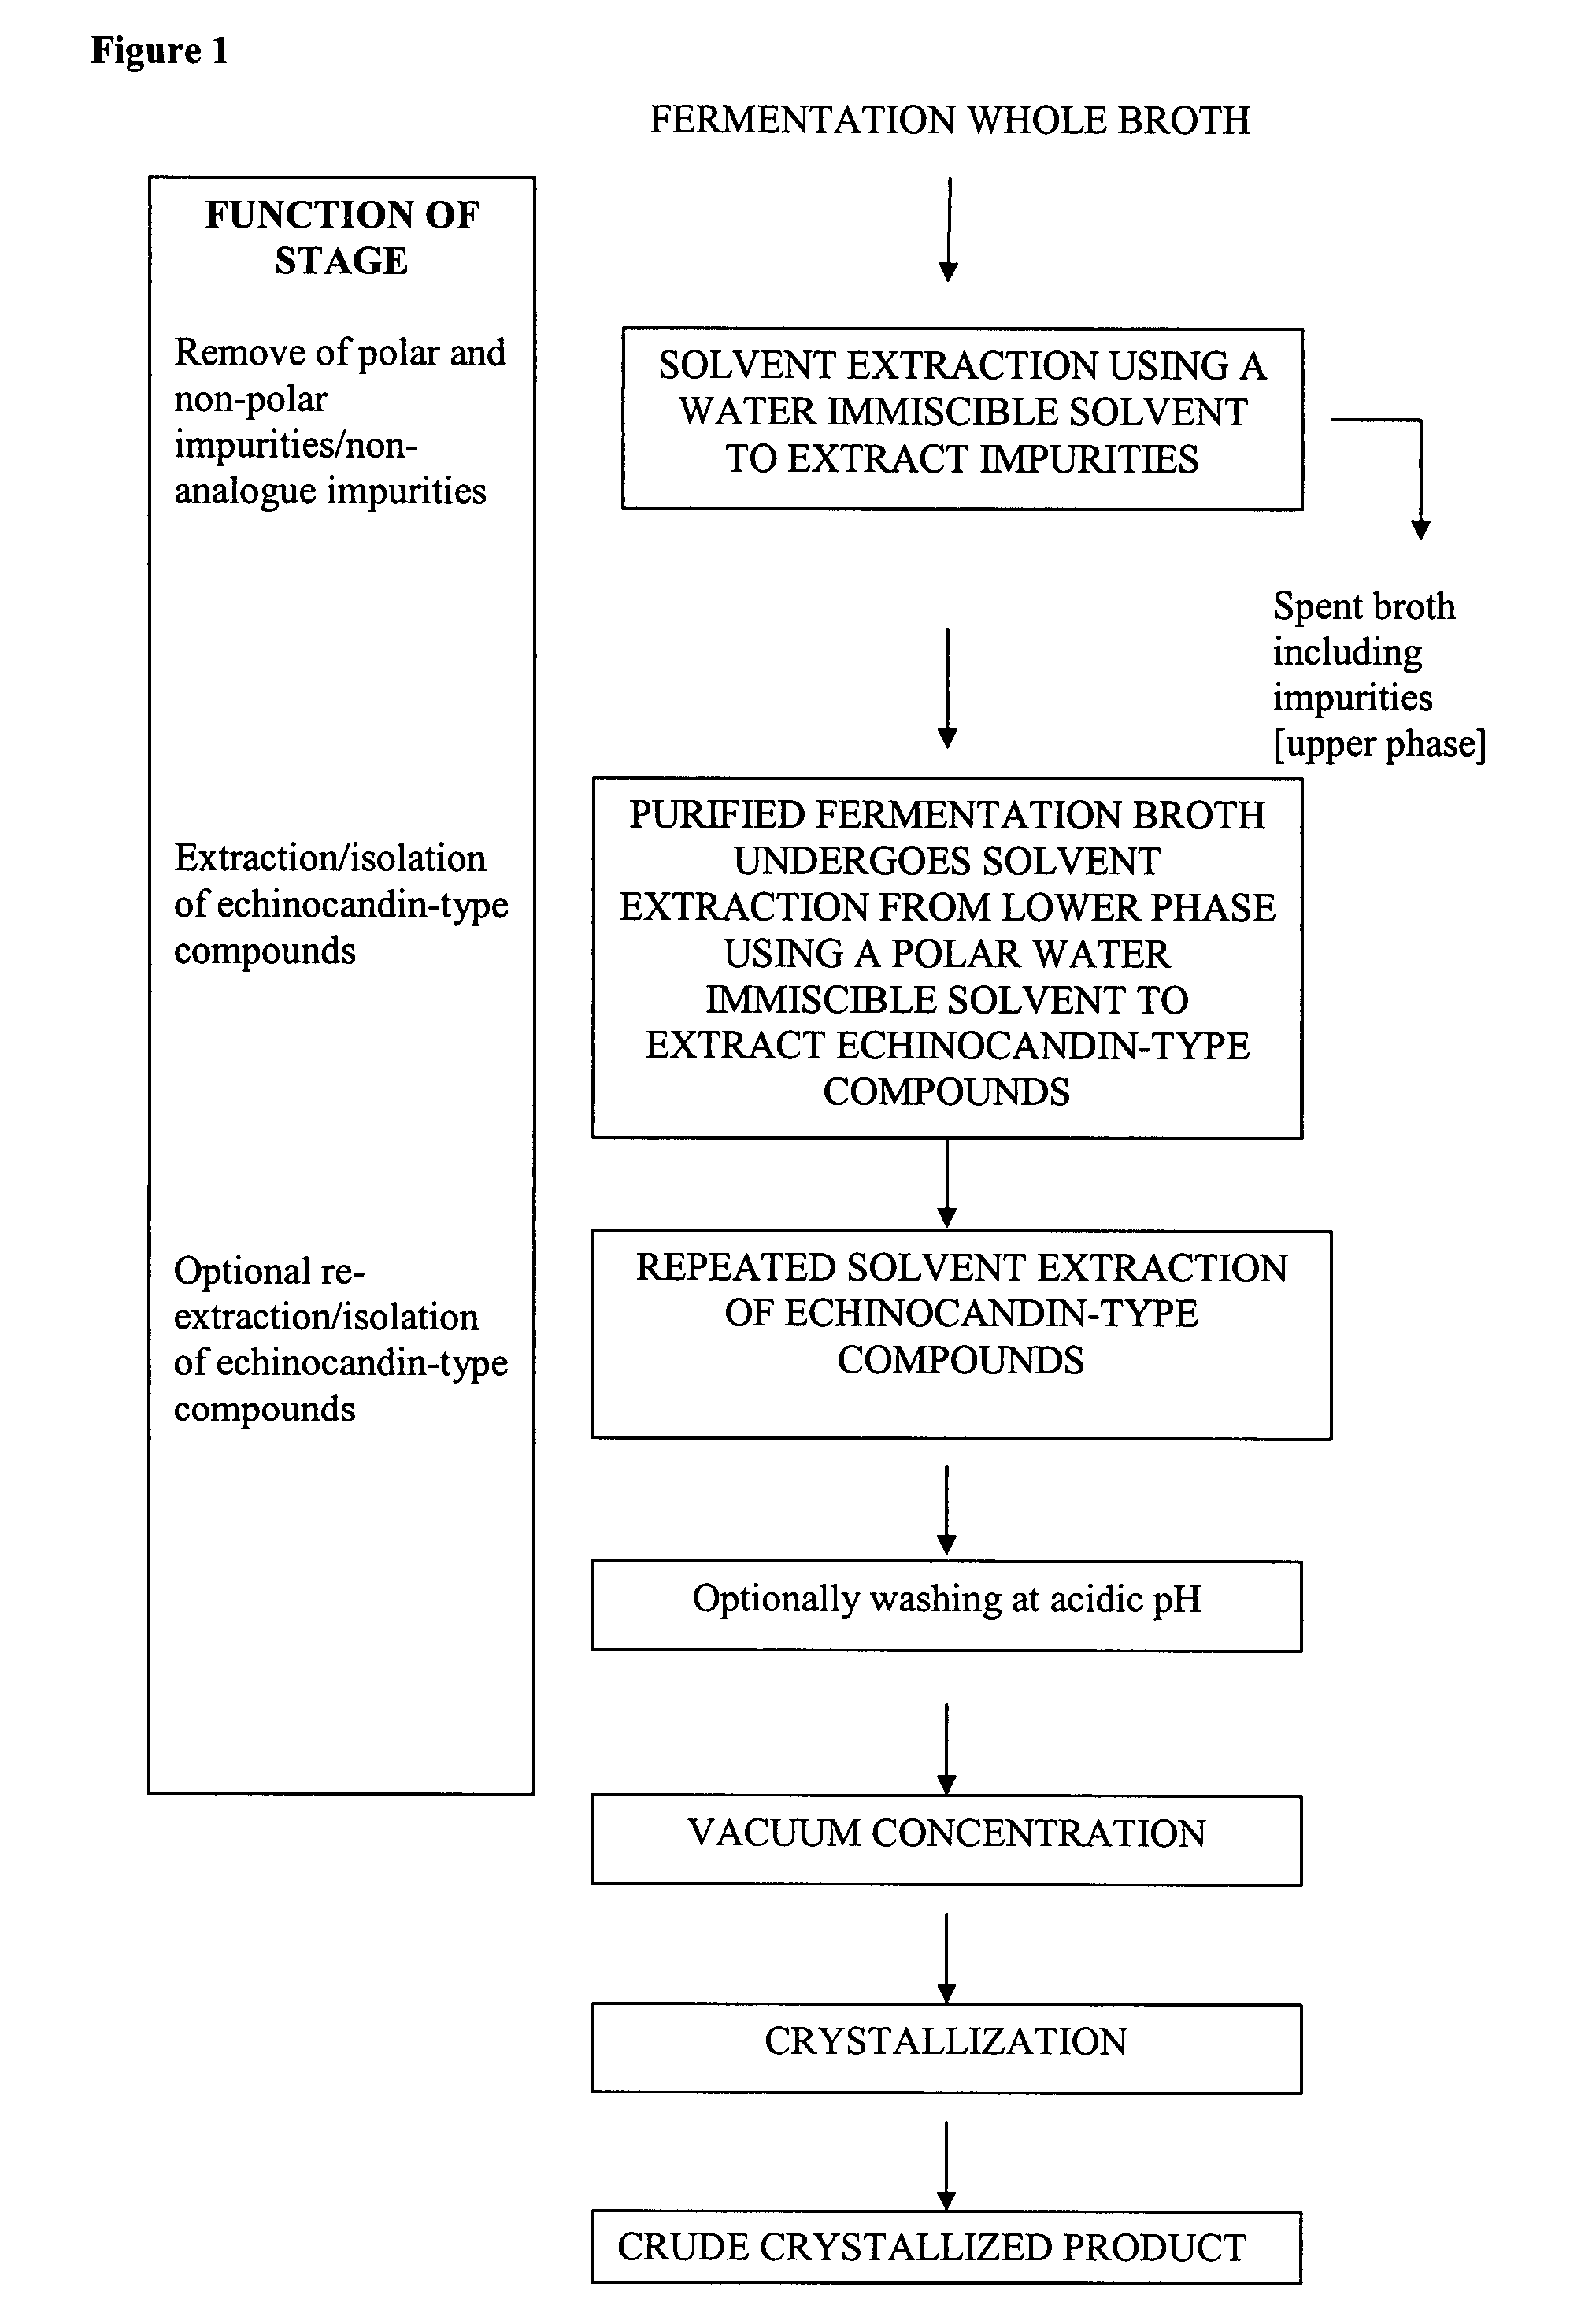 Purification processes for echinocandin-type compounds